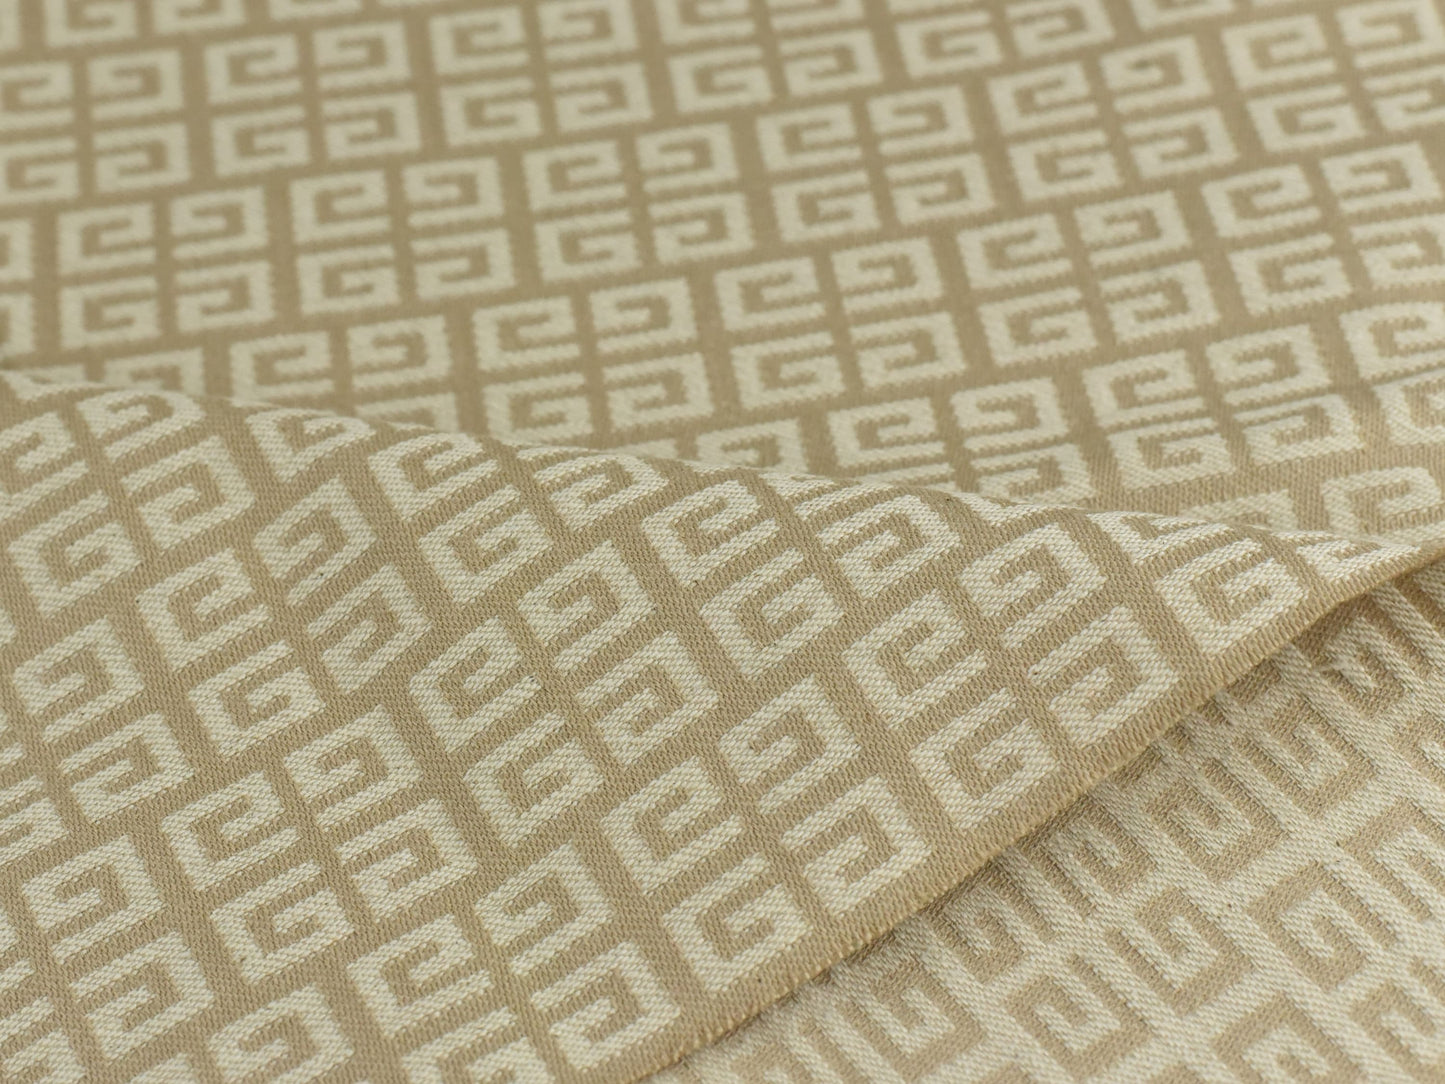 Cotton Linen Only Greek Key Cream Tan Abstract Geometric Upholstery and Curtain Fabric|Lightweight Upholstery Fabric for Pillow Table Runner